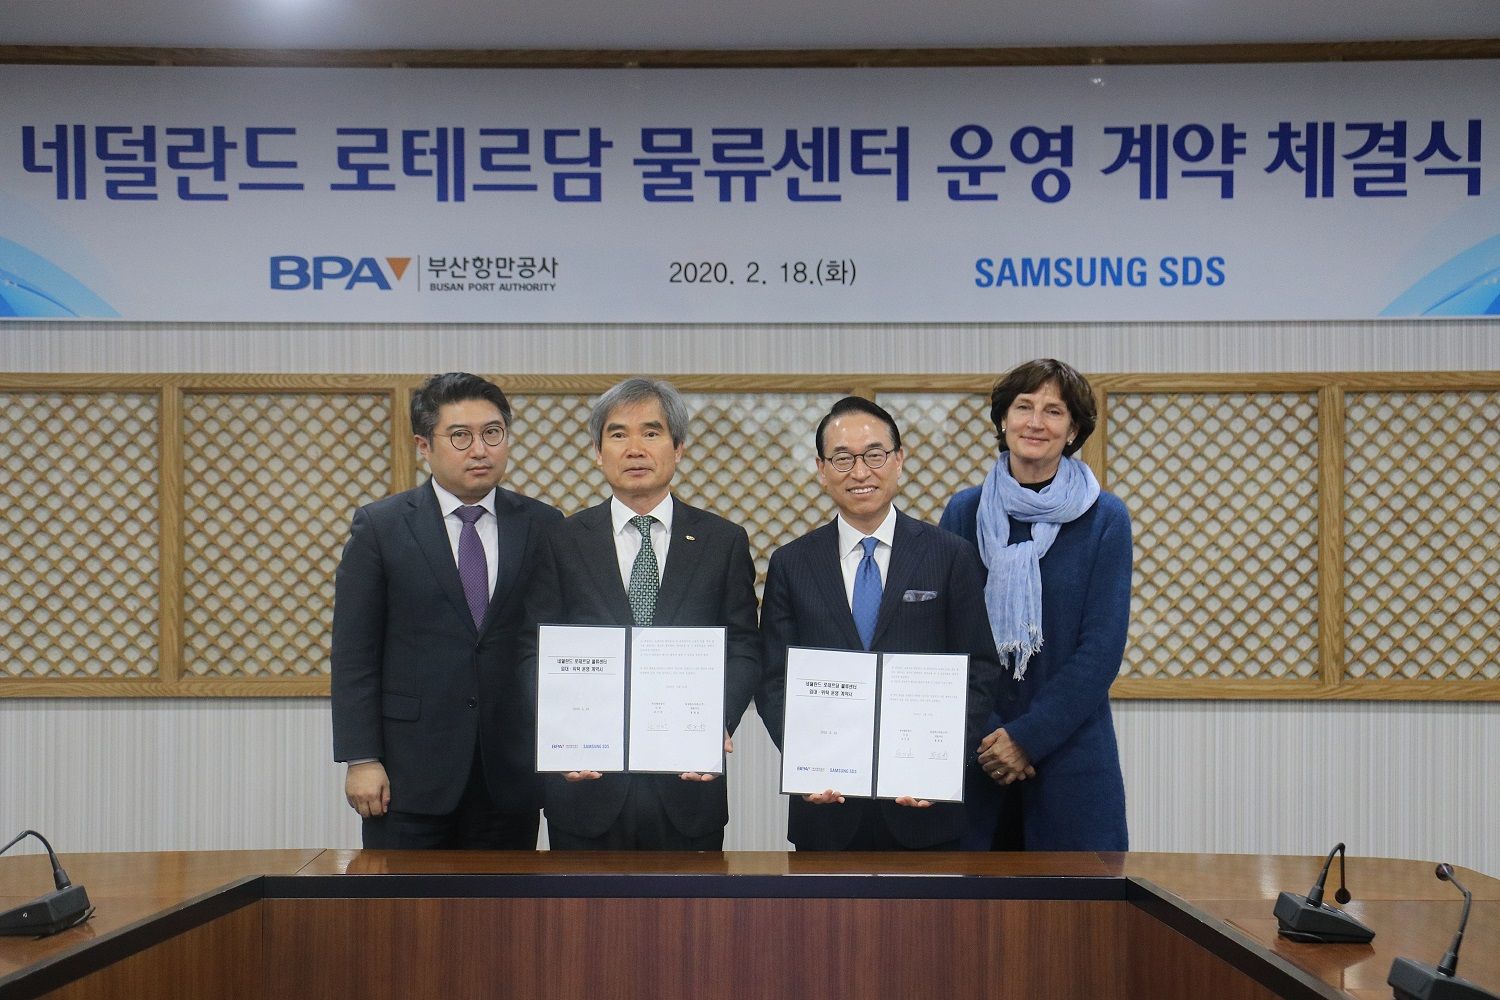 Busan Port Authority and Samsung SDS signed a contract to operate a logistics center in Rotterdam, Netherlands